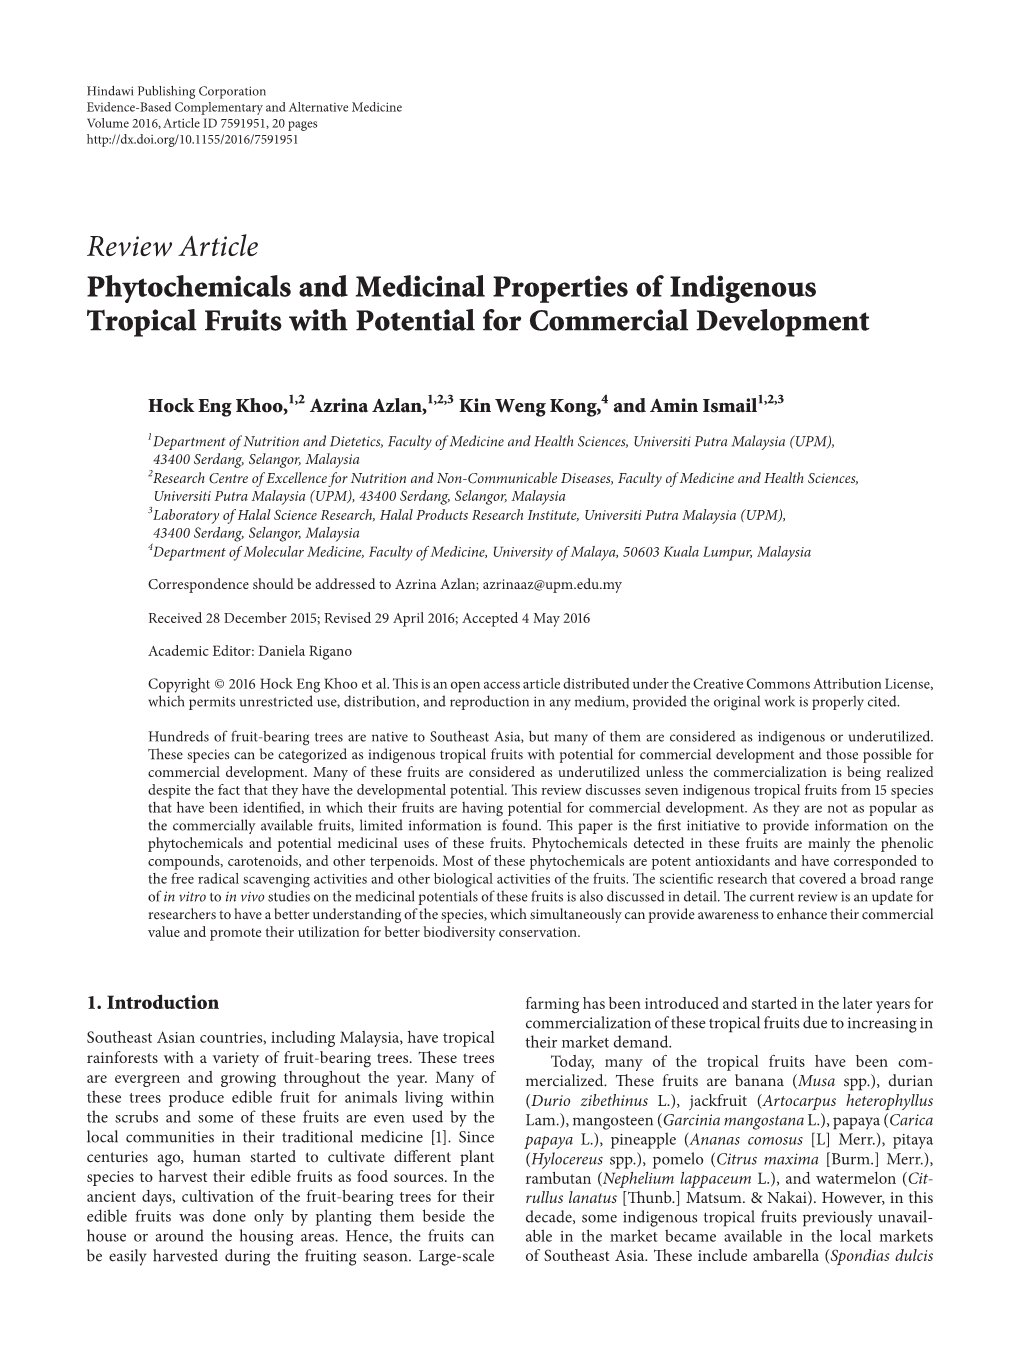 Review Article Phytochemicals and Medicinal Properties of Indigenous Tropical Fruits with Potential for Commercial Development